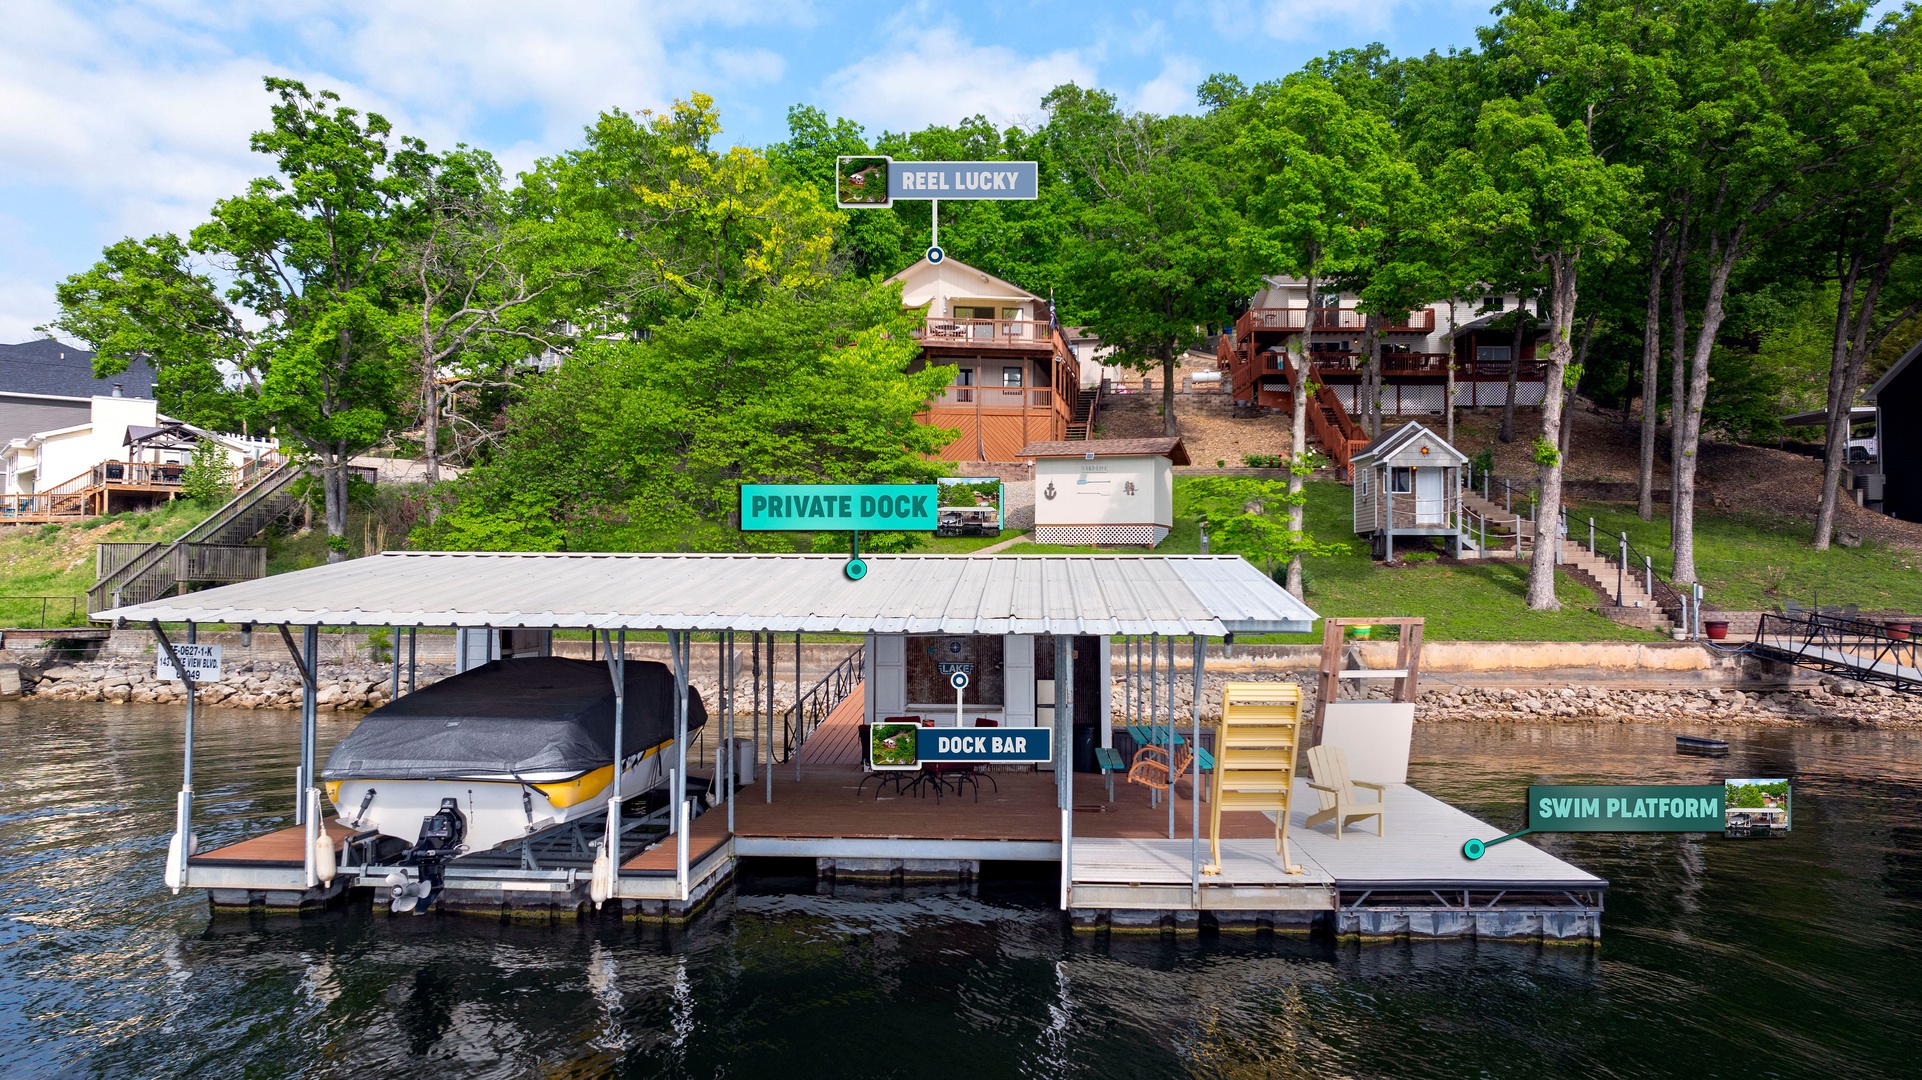 Enjoy the private dock for endless fun and excitement!